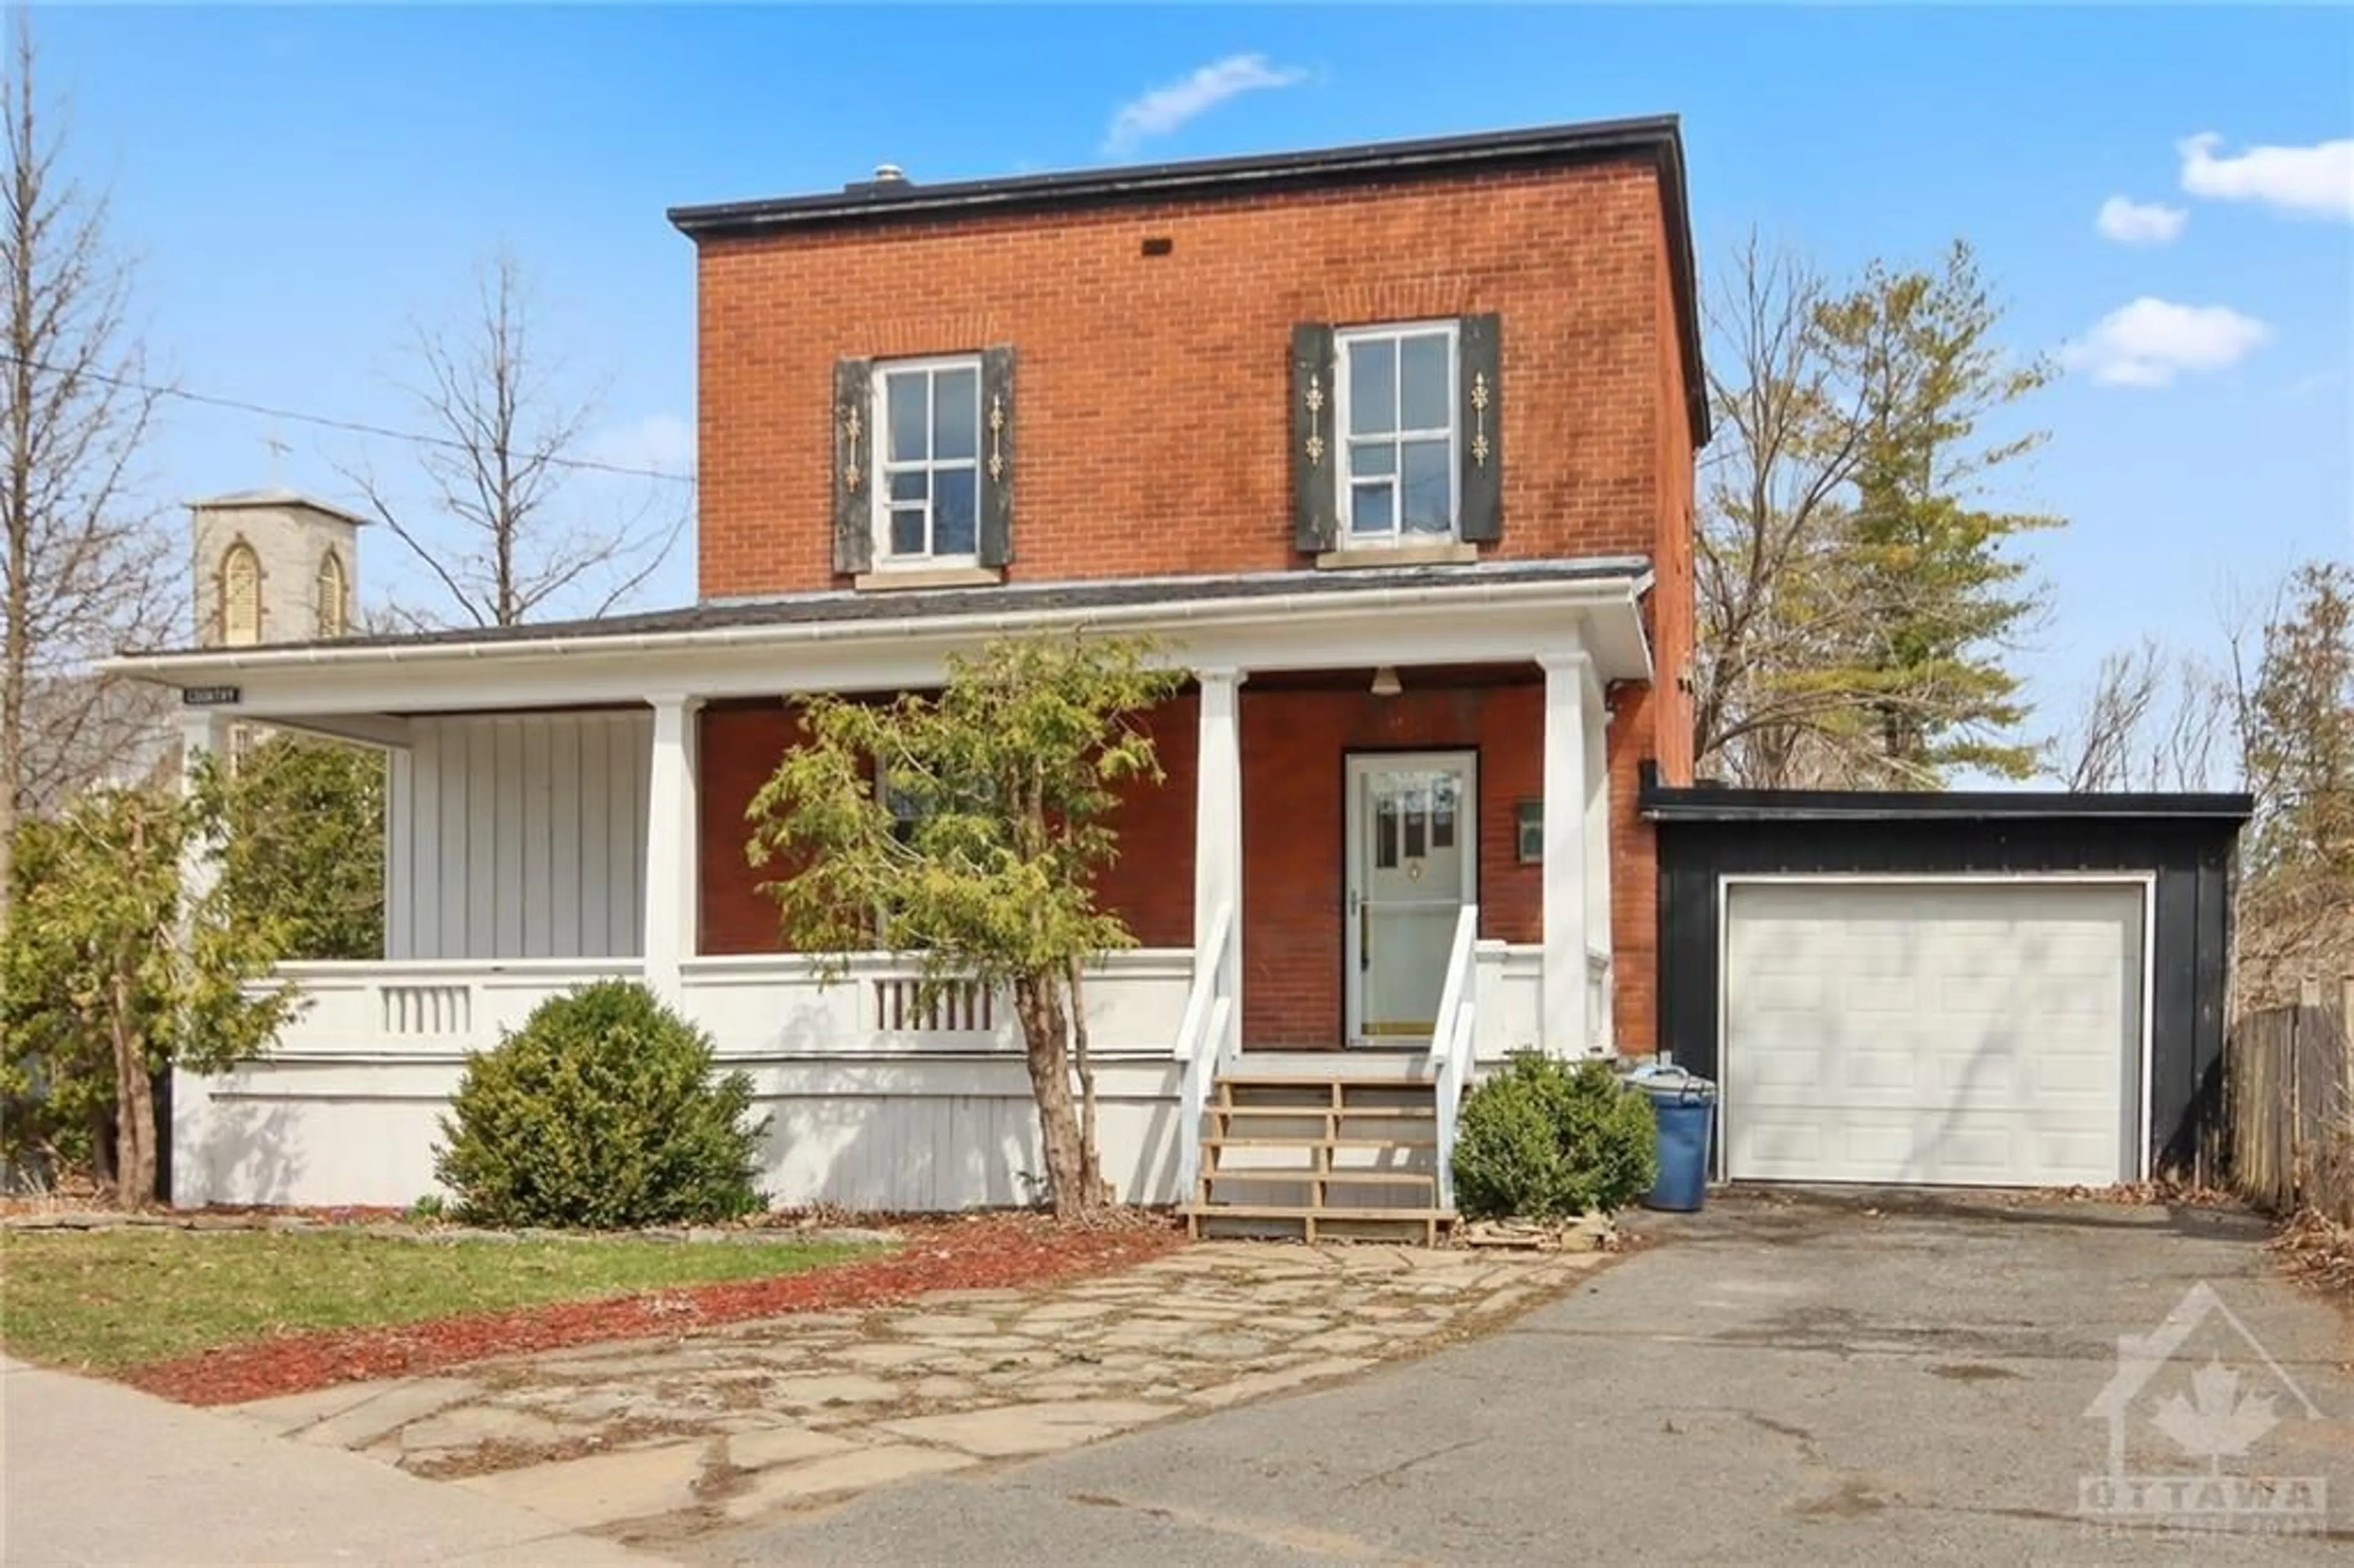 Home with brick exterior material for 159 COUNTRY St, Almonte Ontario K0A 1A0